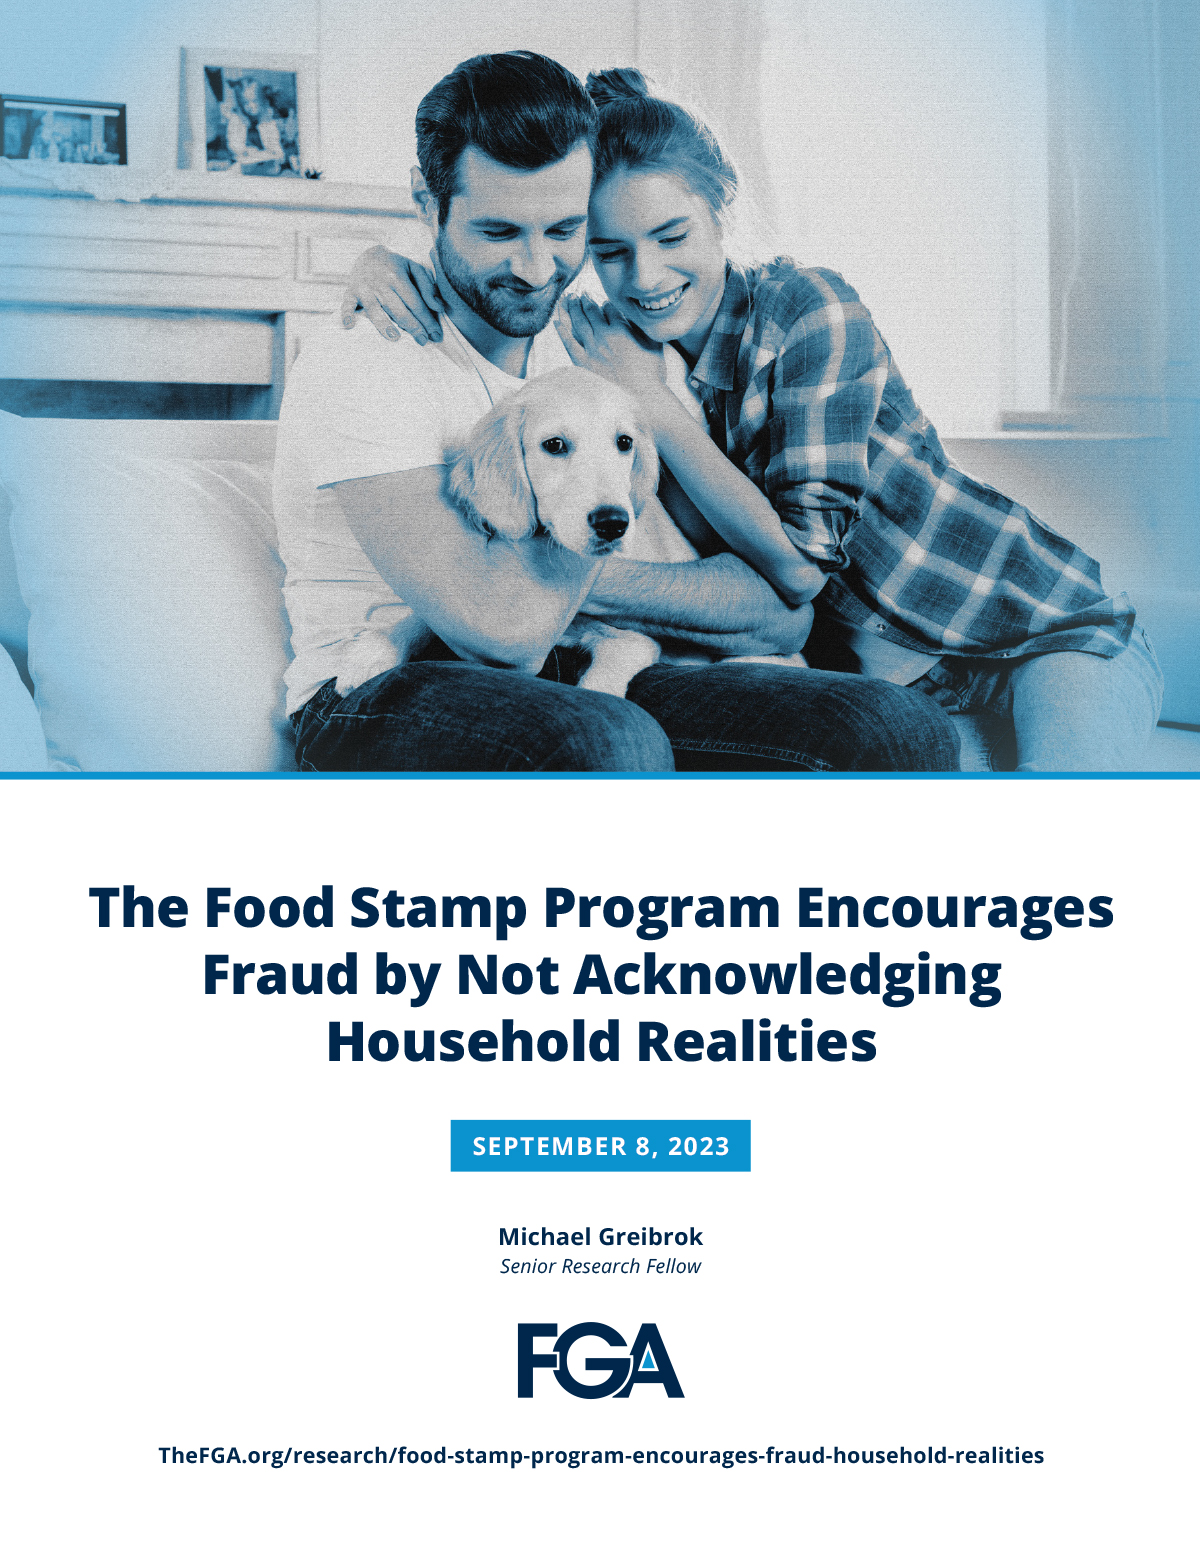 The Food Stamp Program Encourages Fraud by Not Acknowledging Household Realities